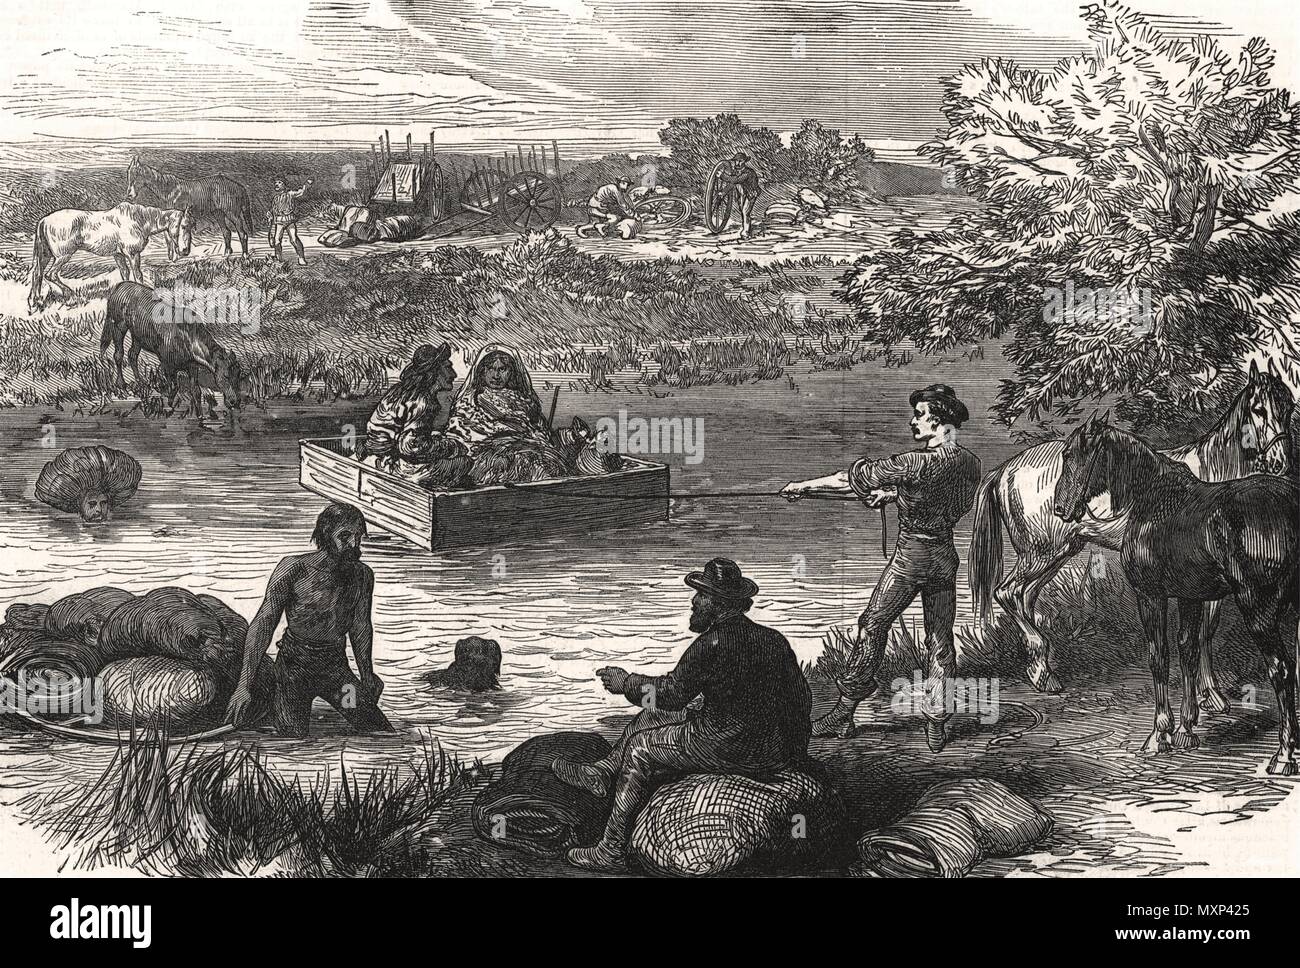 Half-breeds crossing a river in North America. Warwickshire 1874. The Illustrated London News Stock Photo